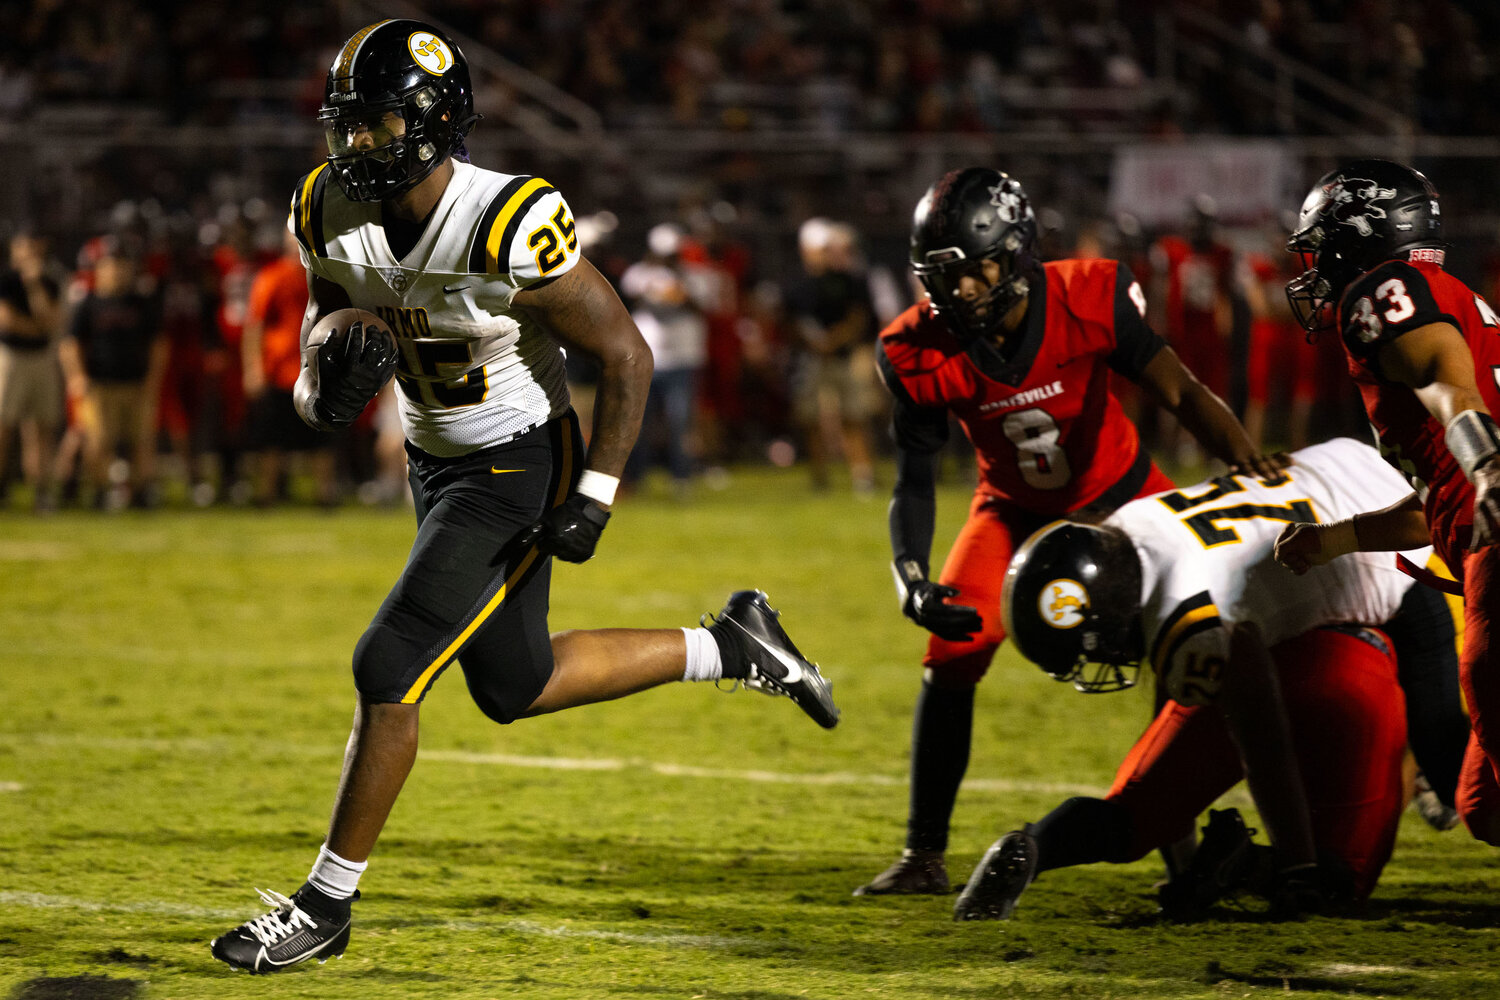 Yellow Jackets running back Jaden Allen-Hendrix carries the ball into the end zone in the second quarter to score one of his four touchdowns of the game.